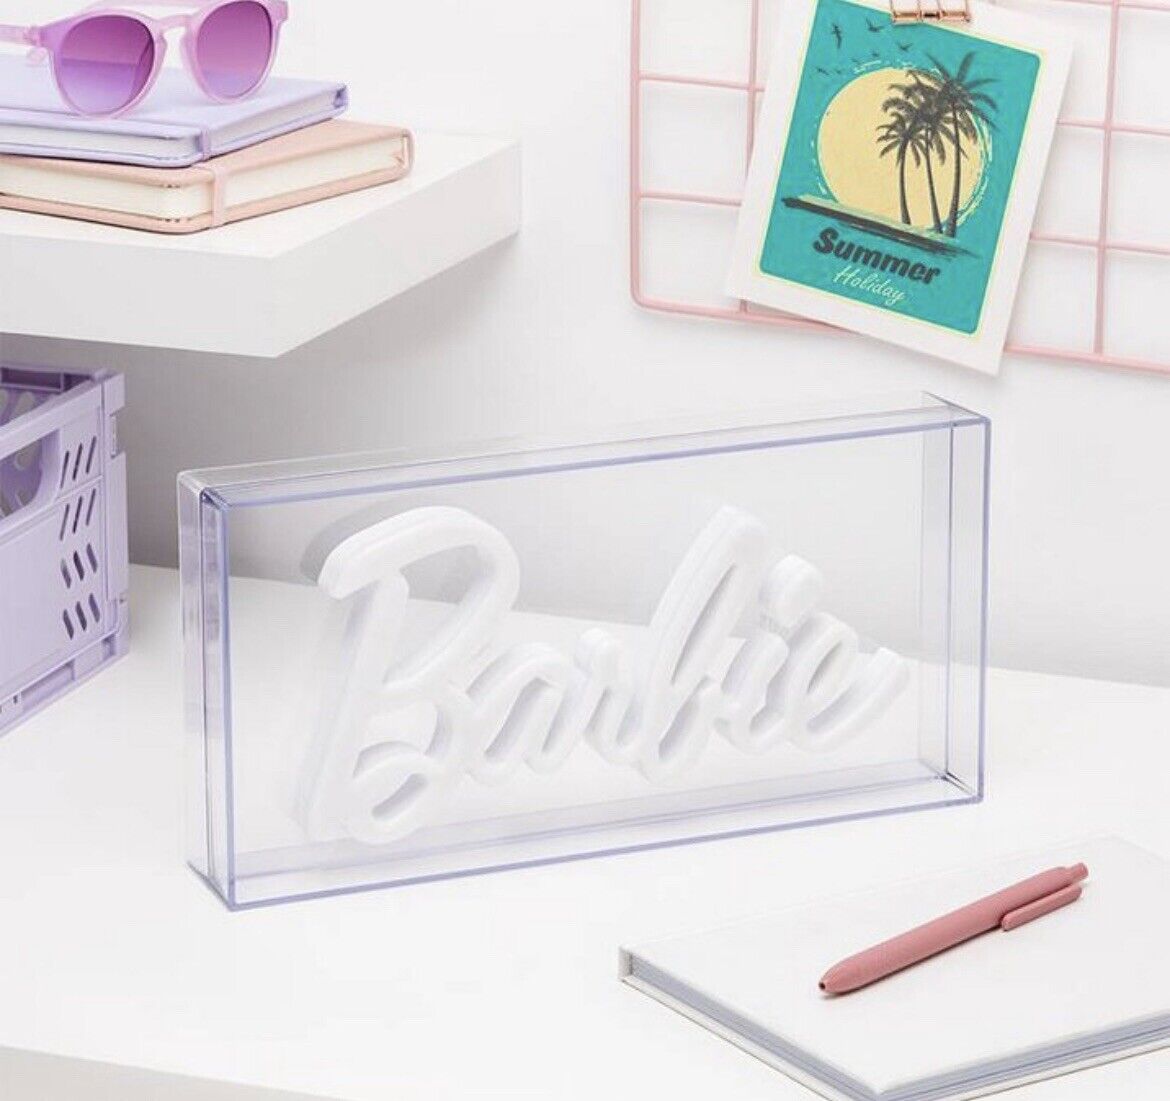 NEW Barbie Logo NEON Pink Light/ Sign LED / USB Powered by Paladone